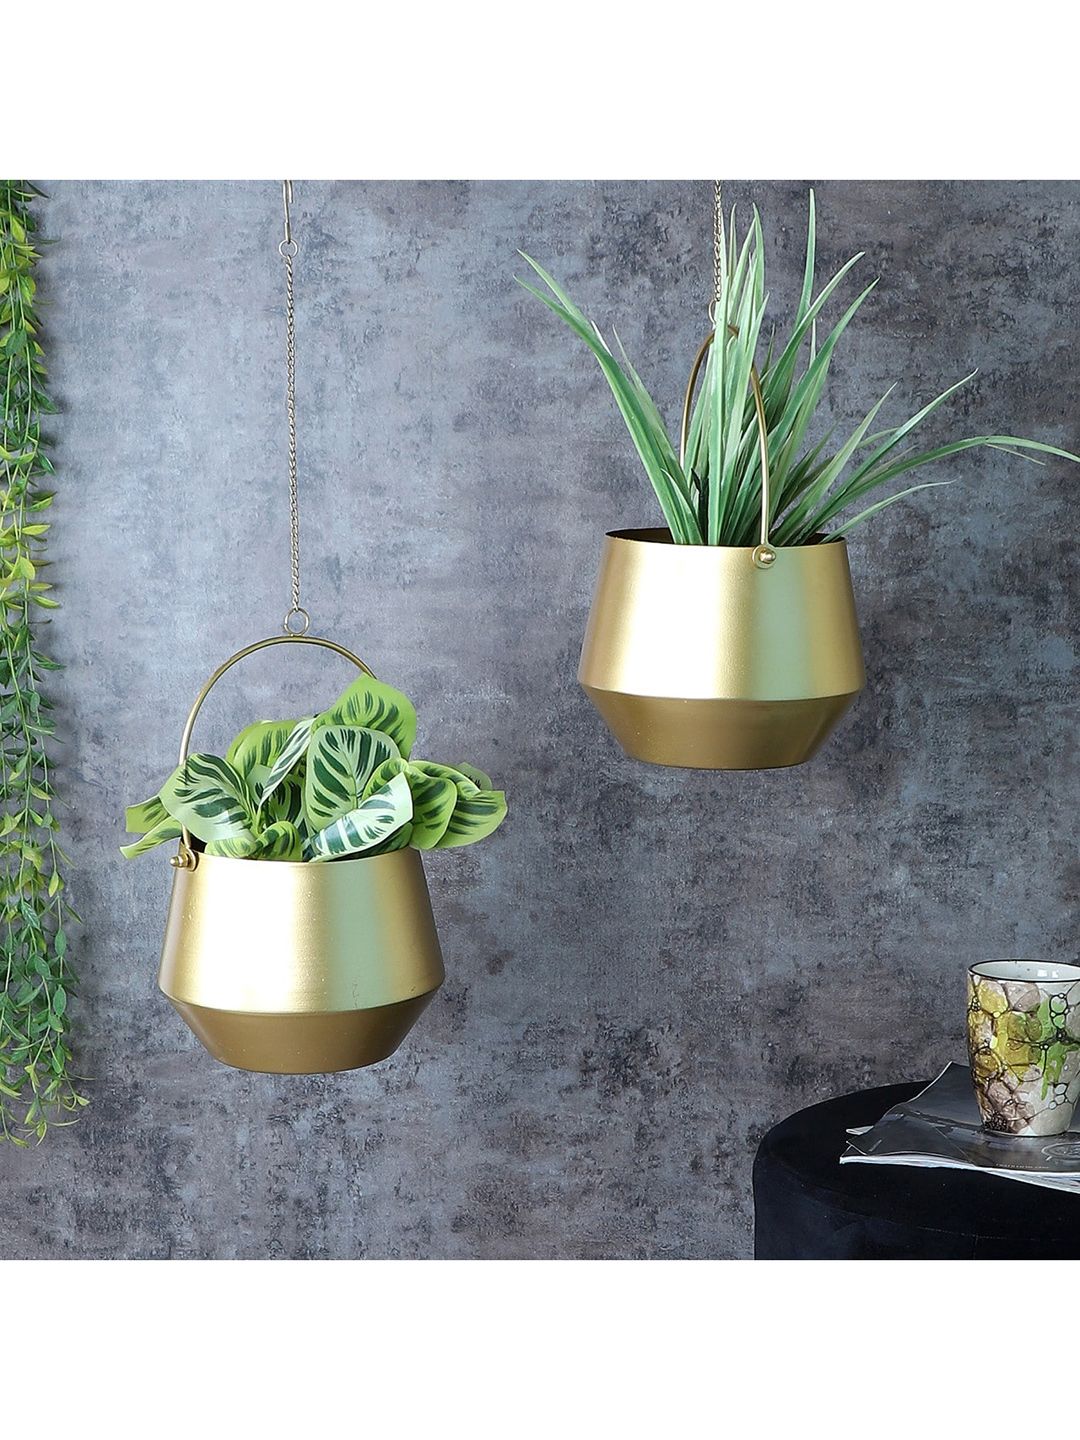 Amaya Decors Set Of 2 Solid Hanging Planters Price in India